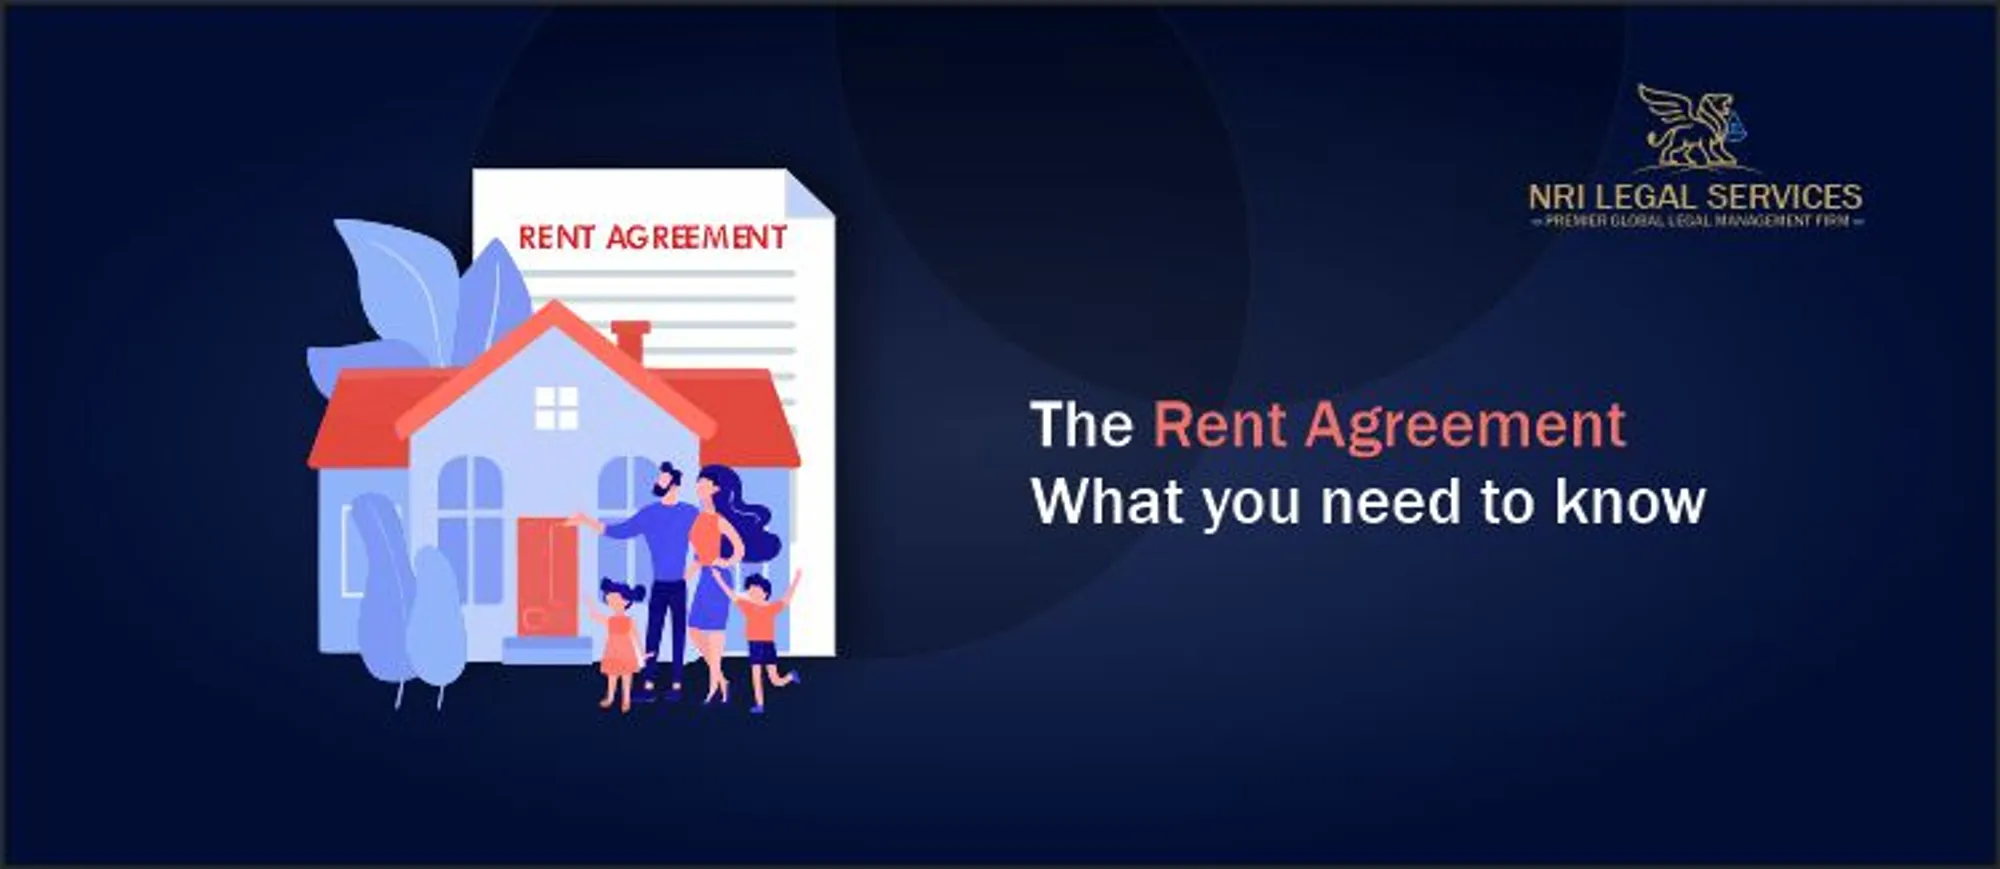 The Rent Agreement: What you need to know